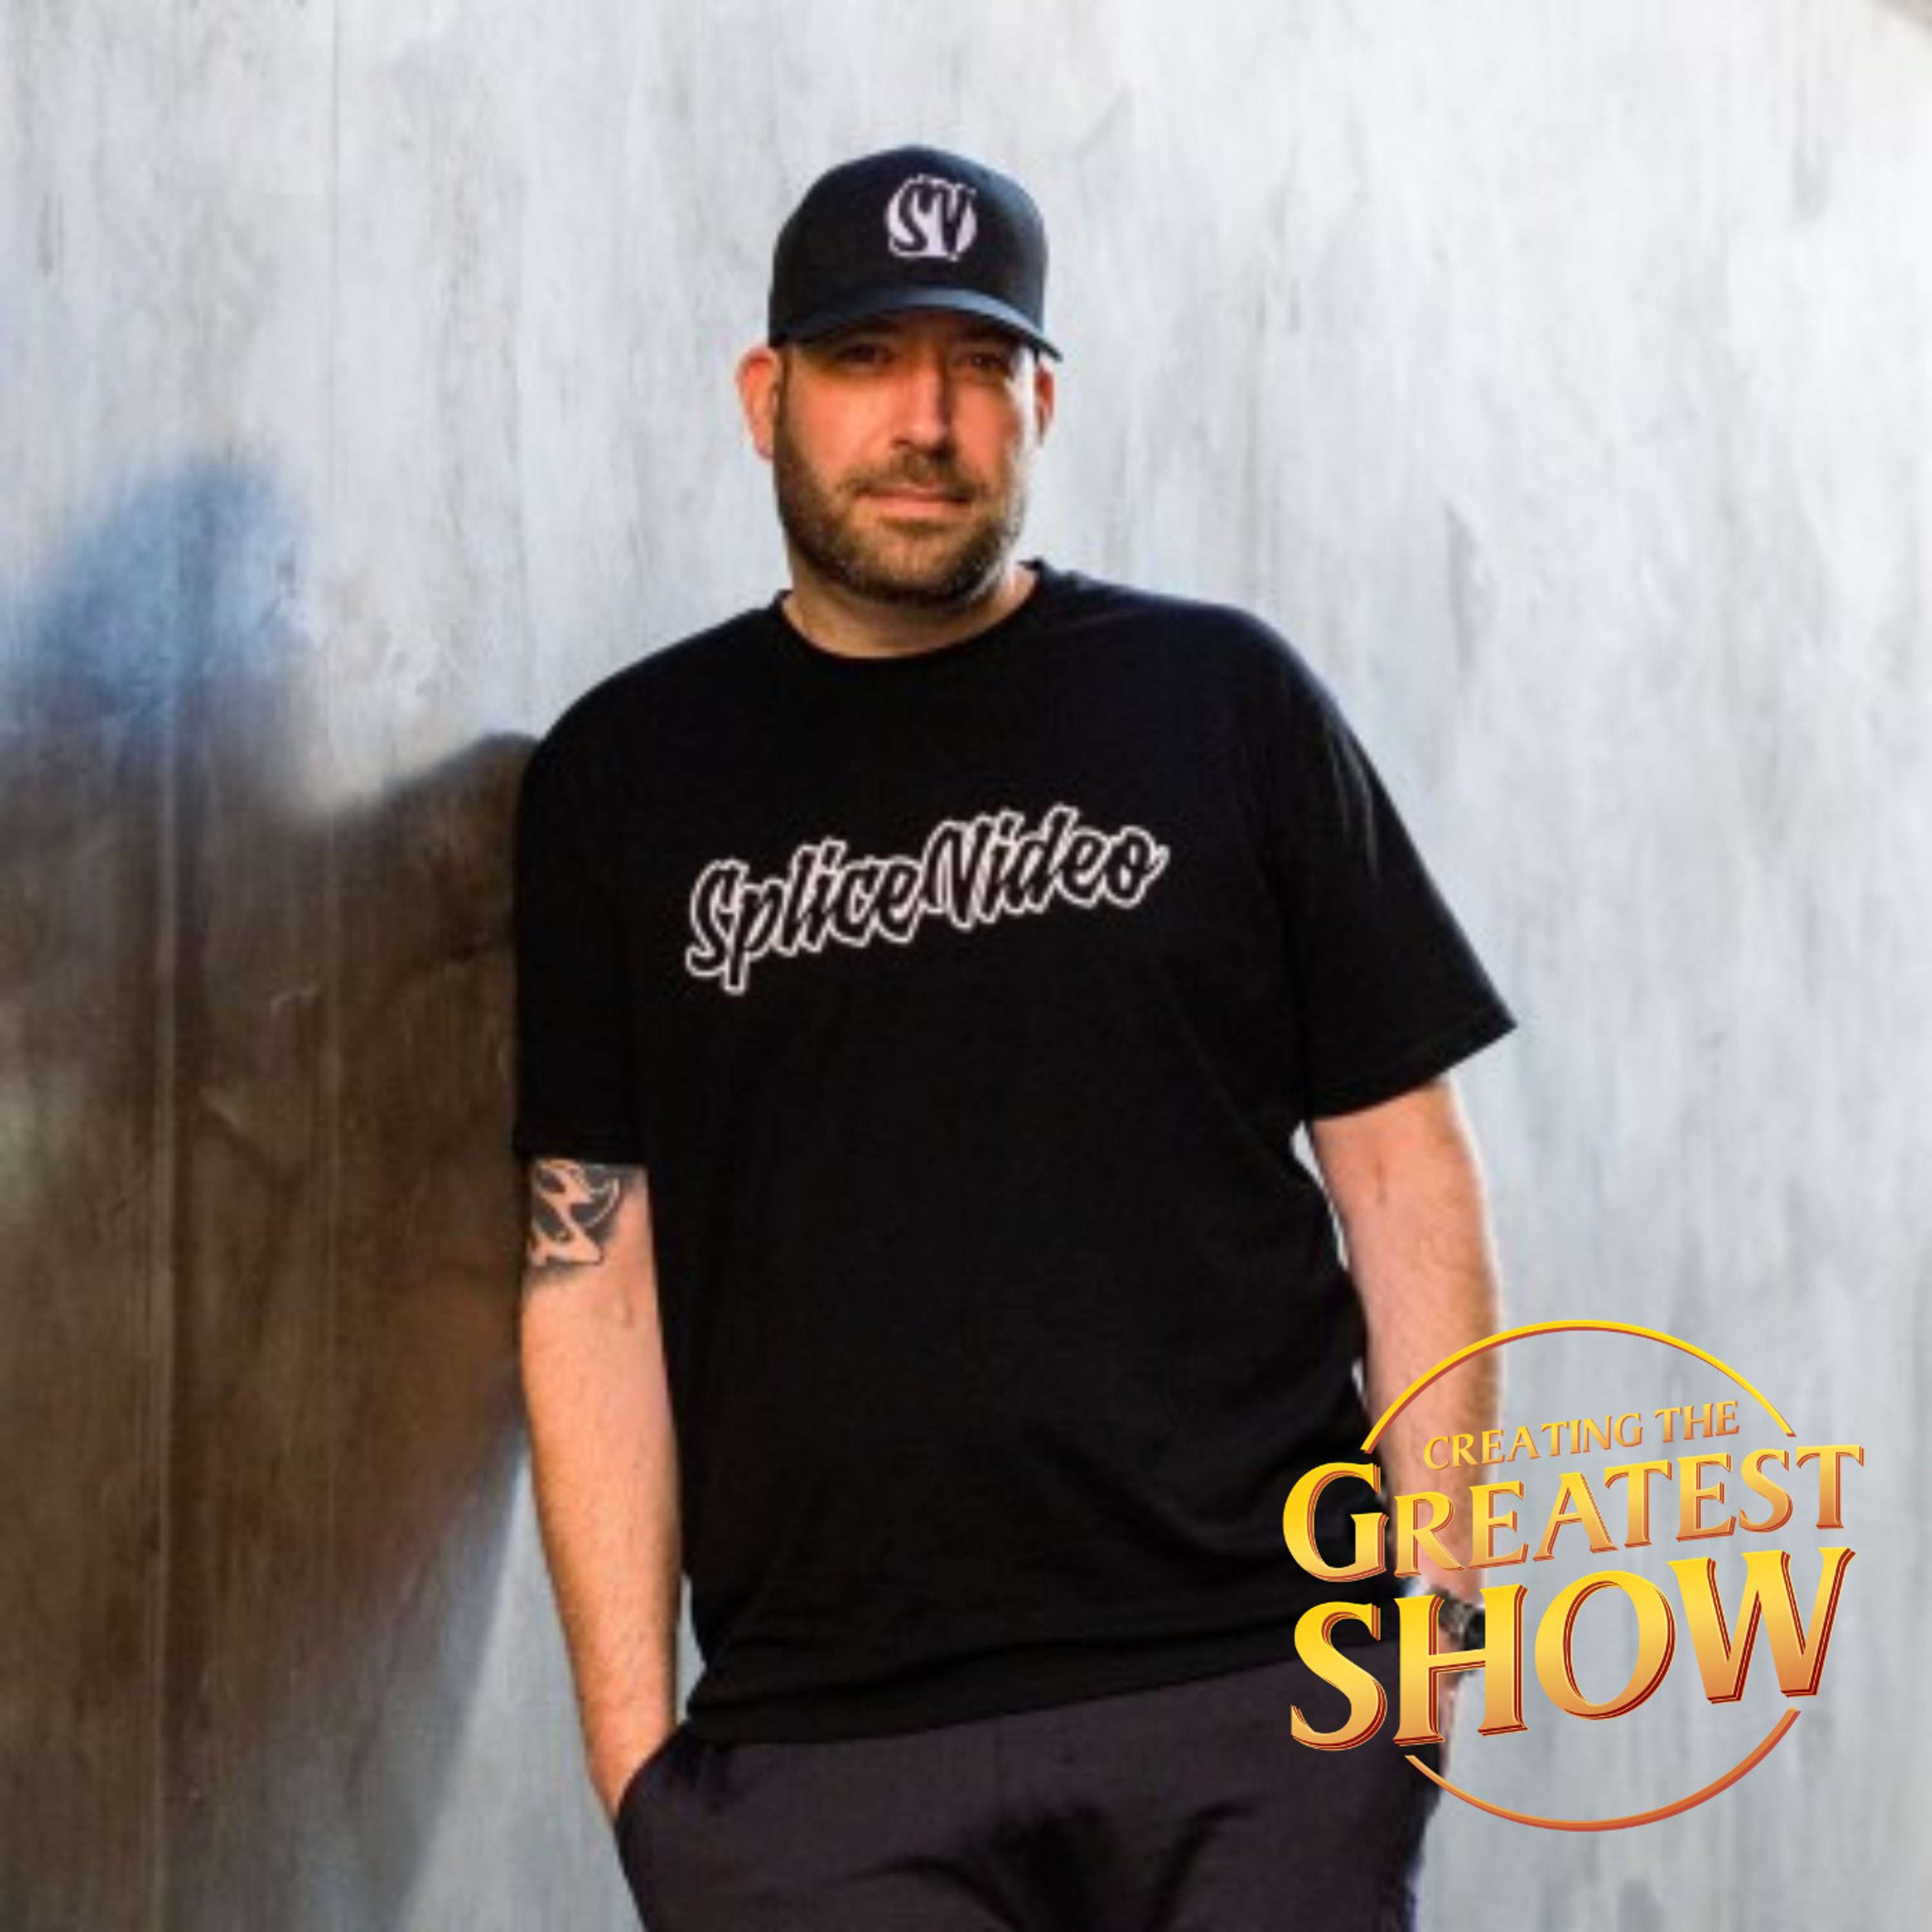 Rapport Building & Storytelling - Nick Capozzi - Creating The Greatest Show - Episode # 057